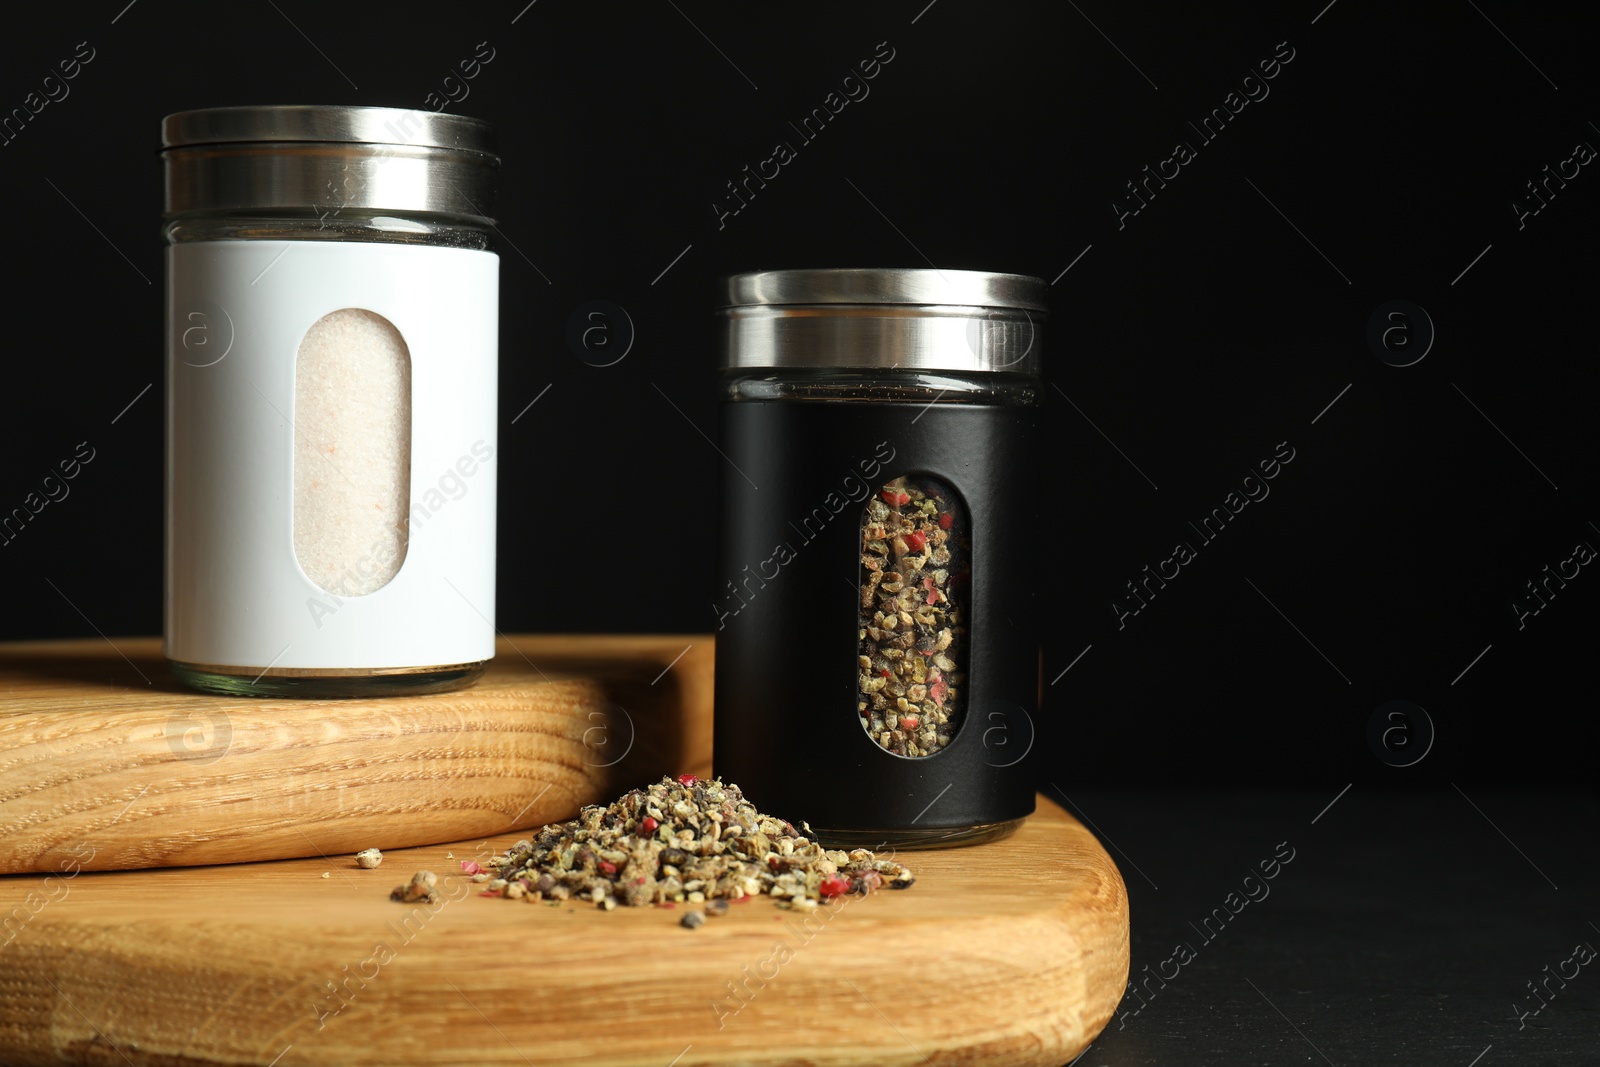 Photo of Salt and pepper shakers on table against black background